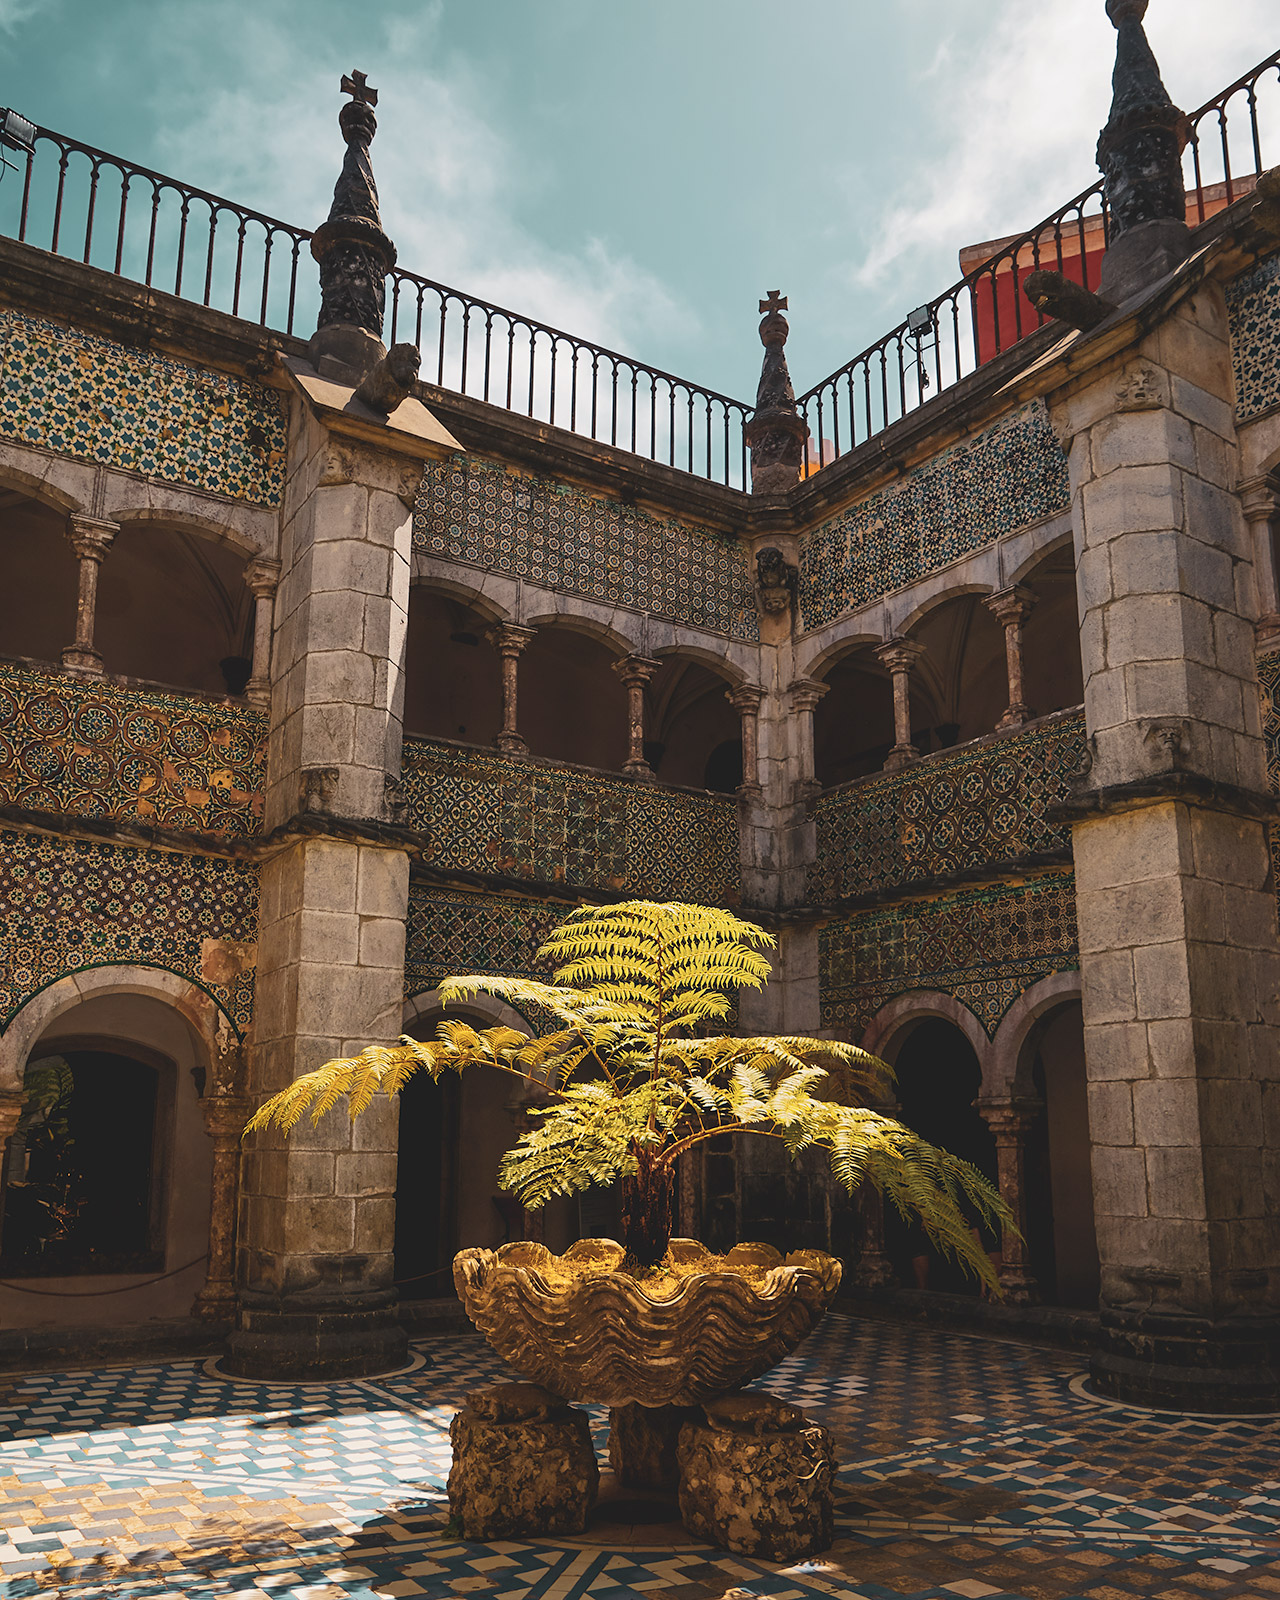 The courtyard at the Pena Palace's cloister.